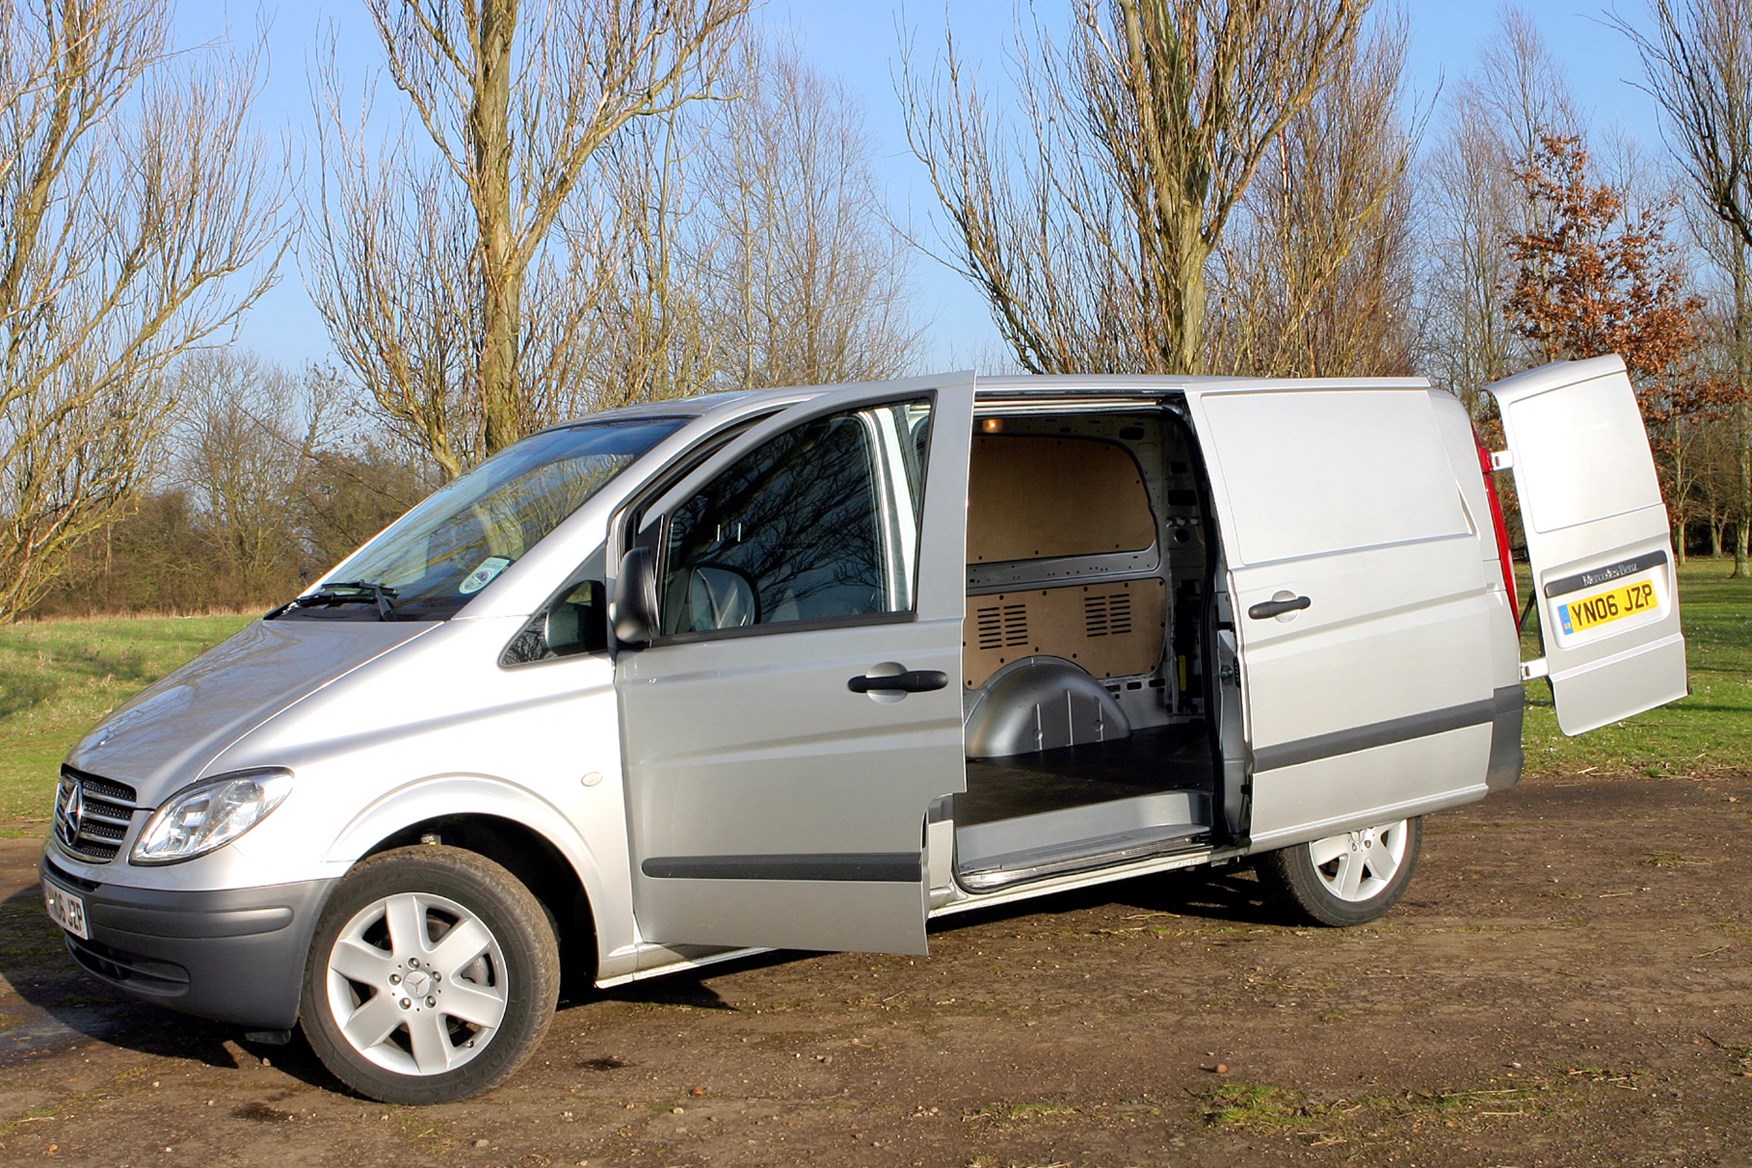 Mercedes-Benz Vito 2003-2014 review on Parkers Vans - load area access